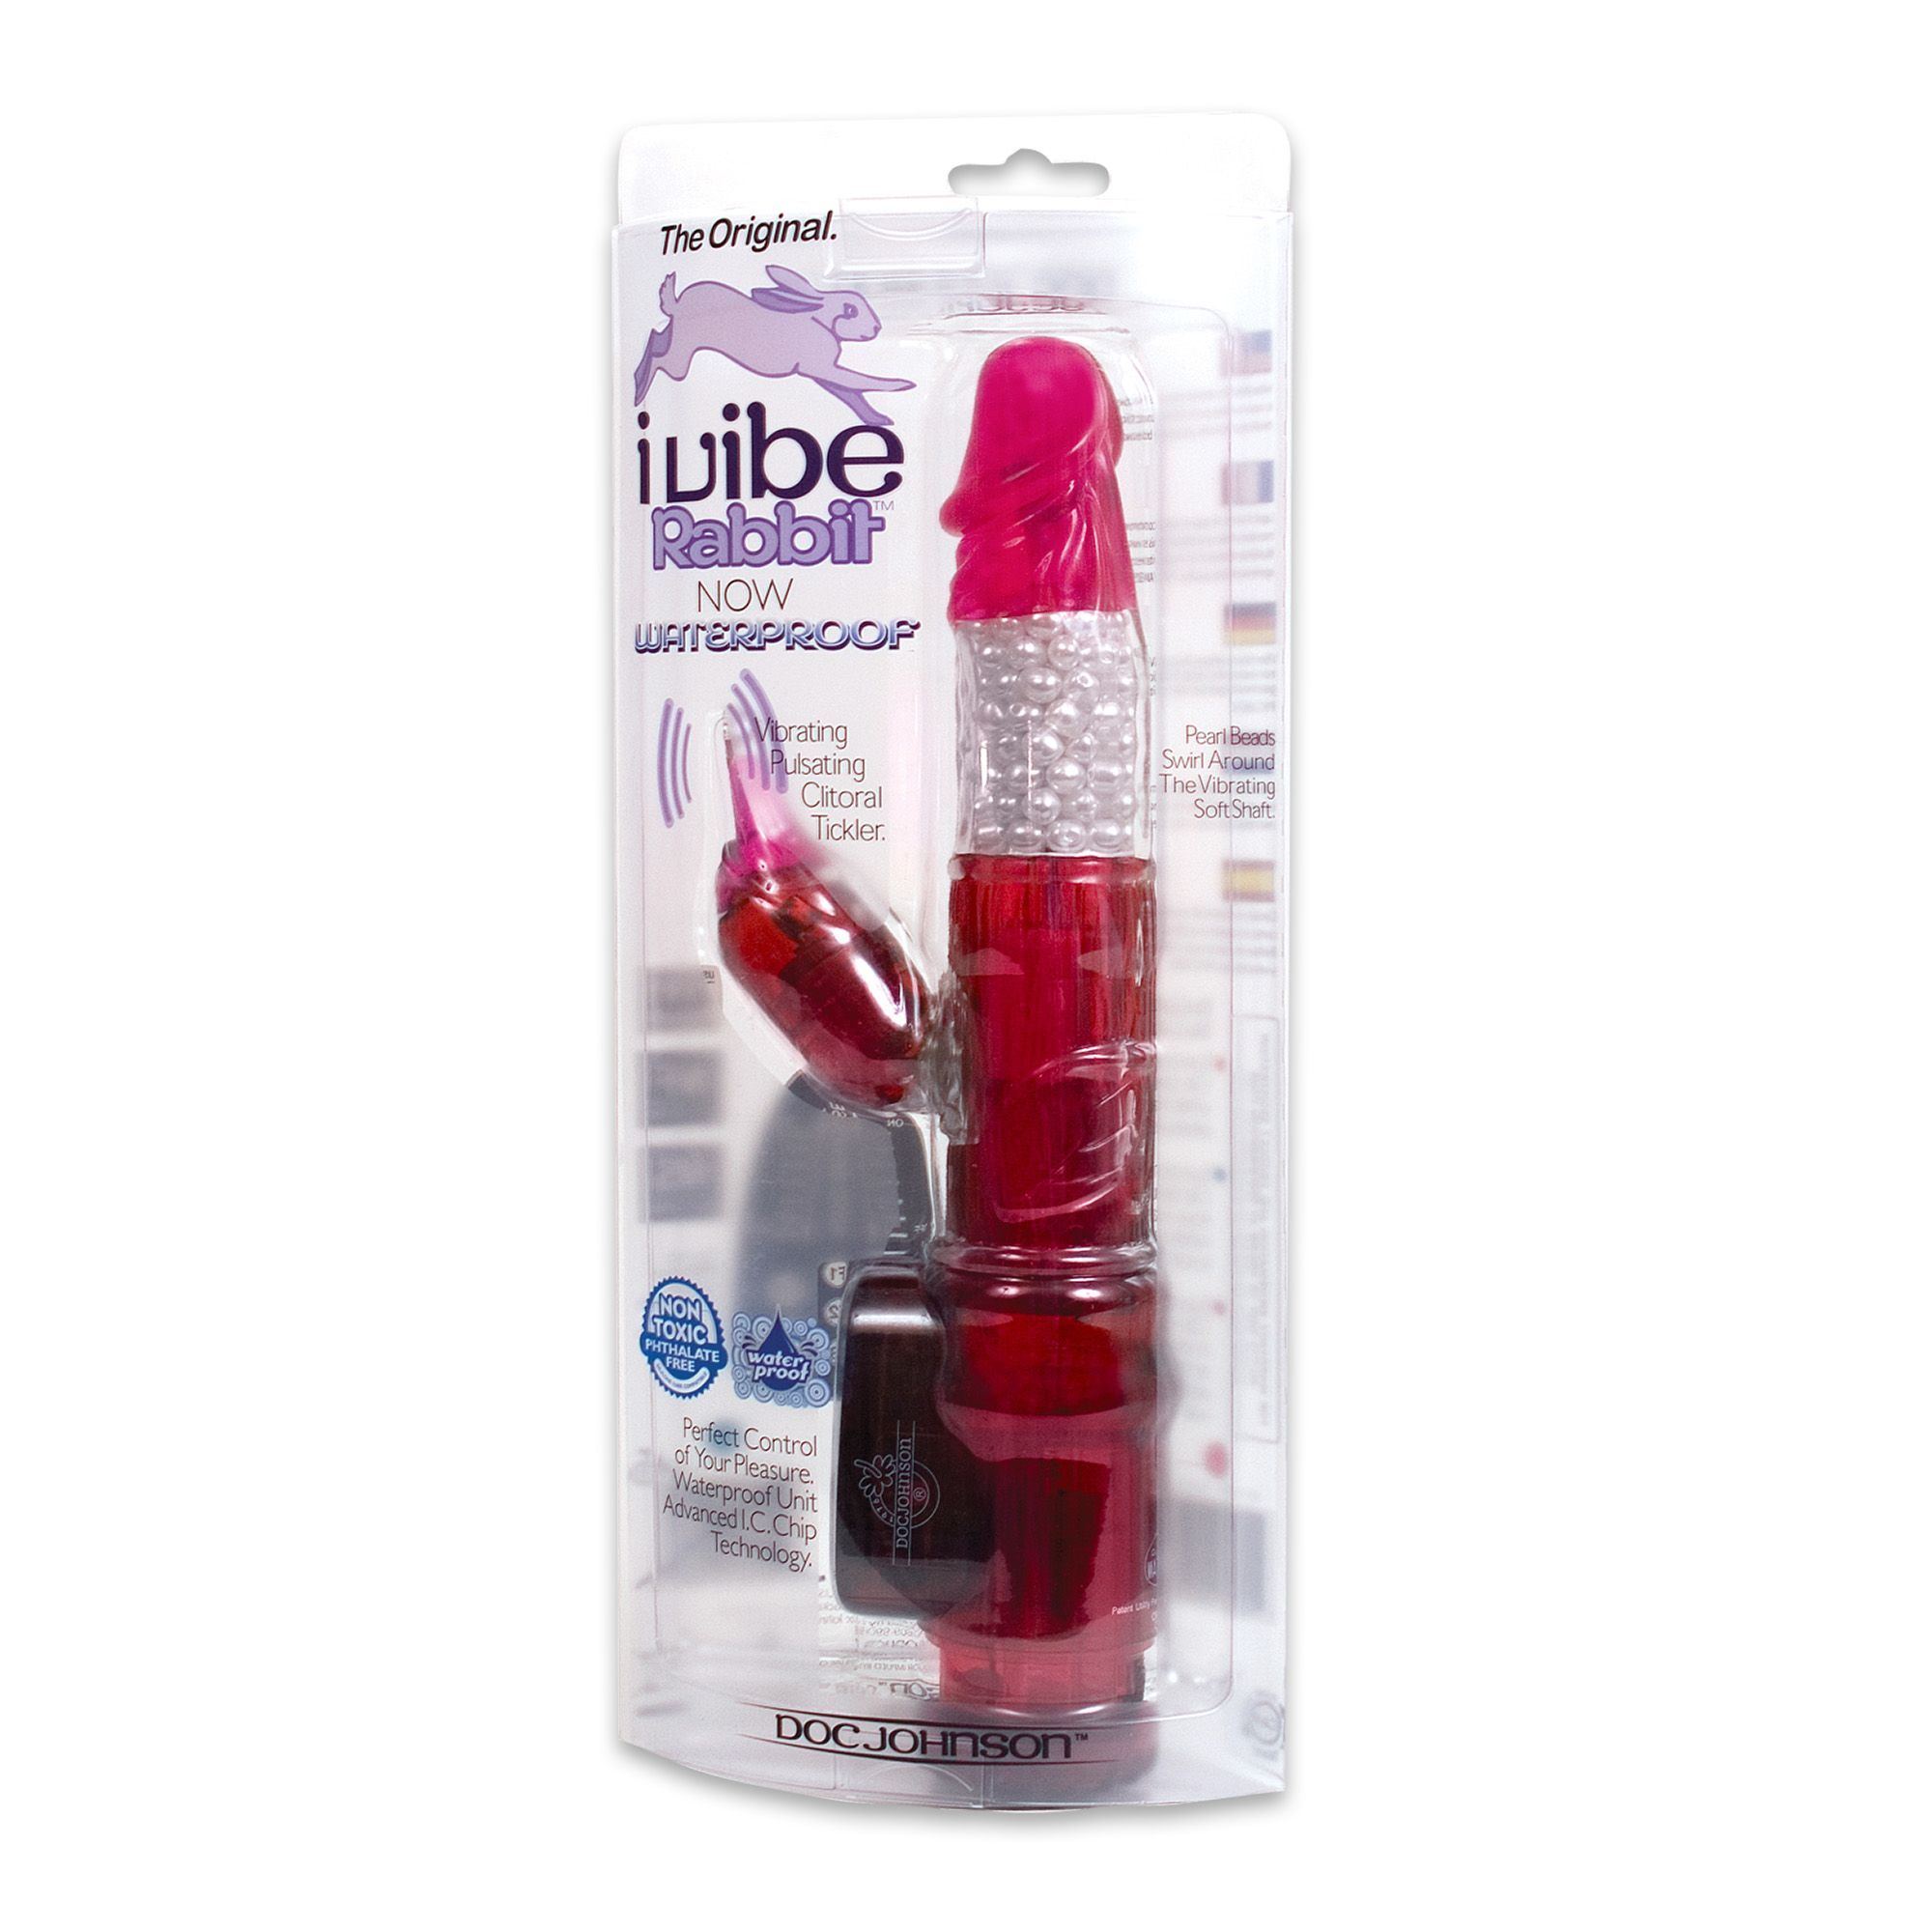 Ivibe suction cup rabbit vibrator strawberry